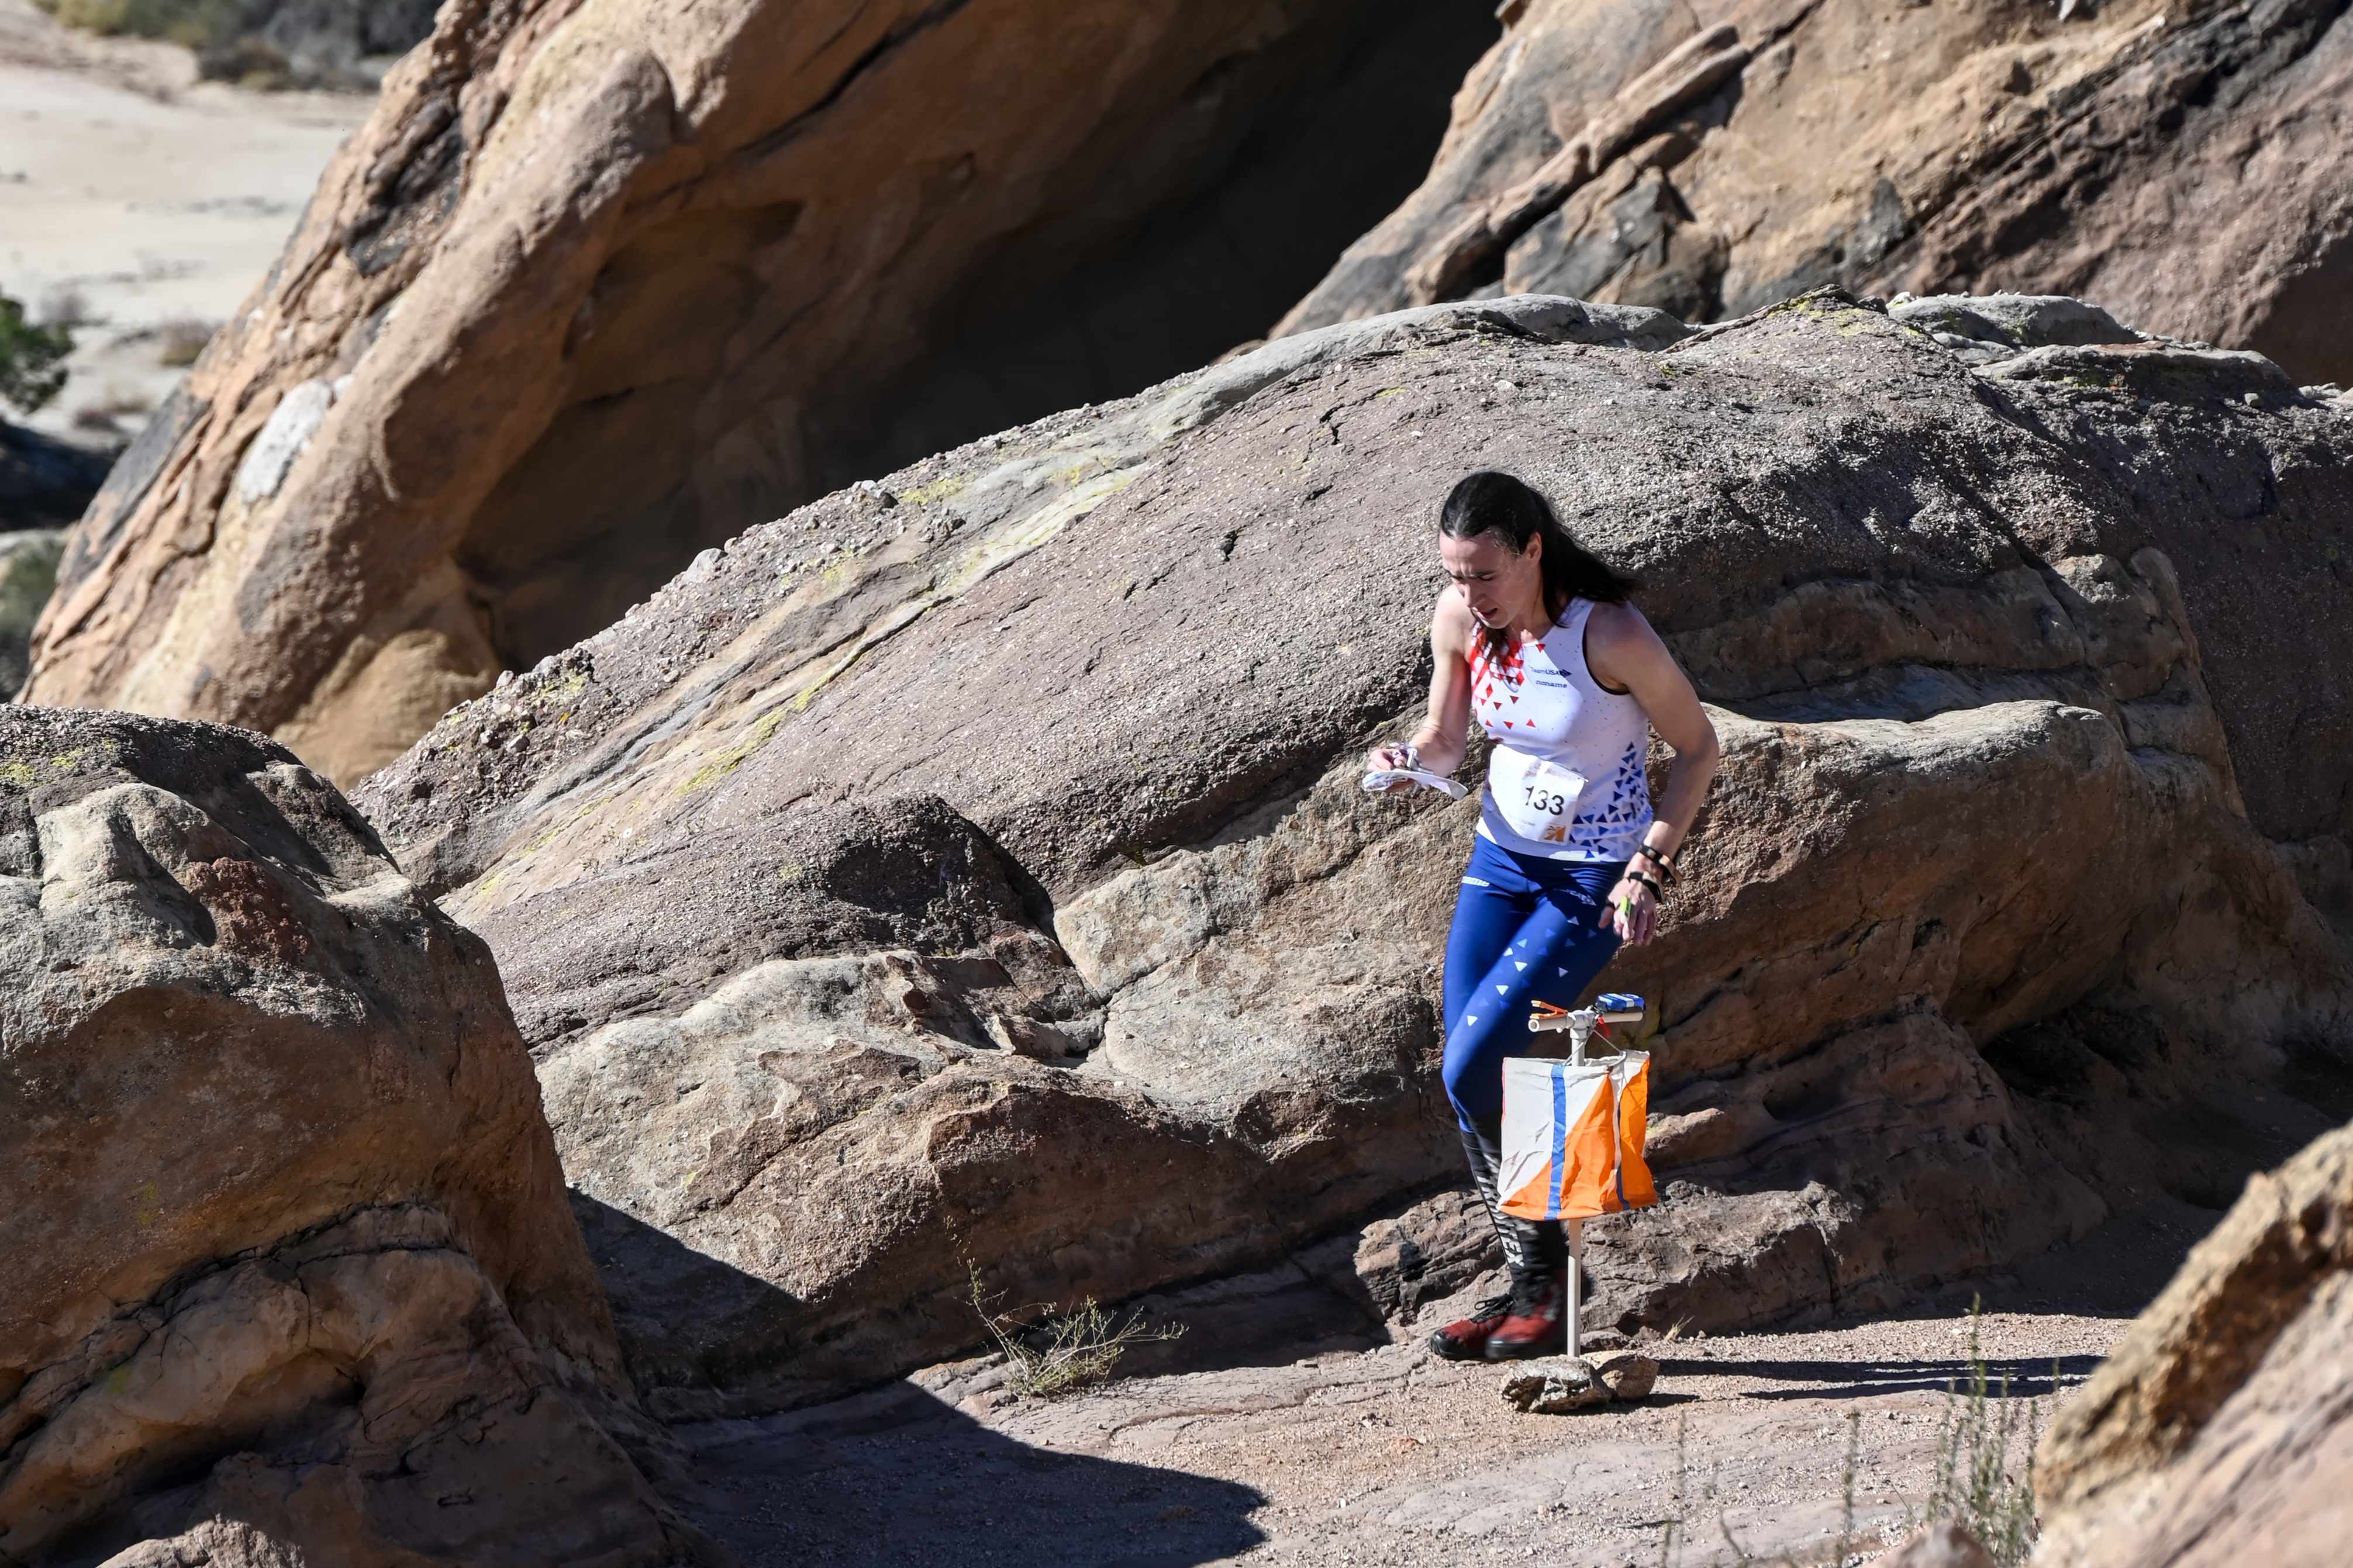 TeamUSA Elite Squad member Alison Crocker (OR) slows briefly to interpret the complex rock detail of Vasquez Rocks Natural Area (Agua Dulce, CA). Alison would go on to win this Women's Elite course to be crowned US Middle Distance Champion for 2022. (Orienteering USA)